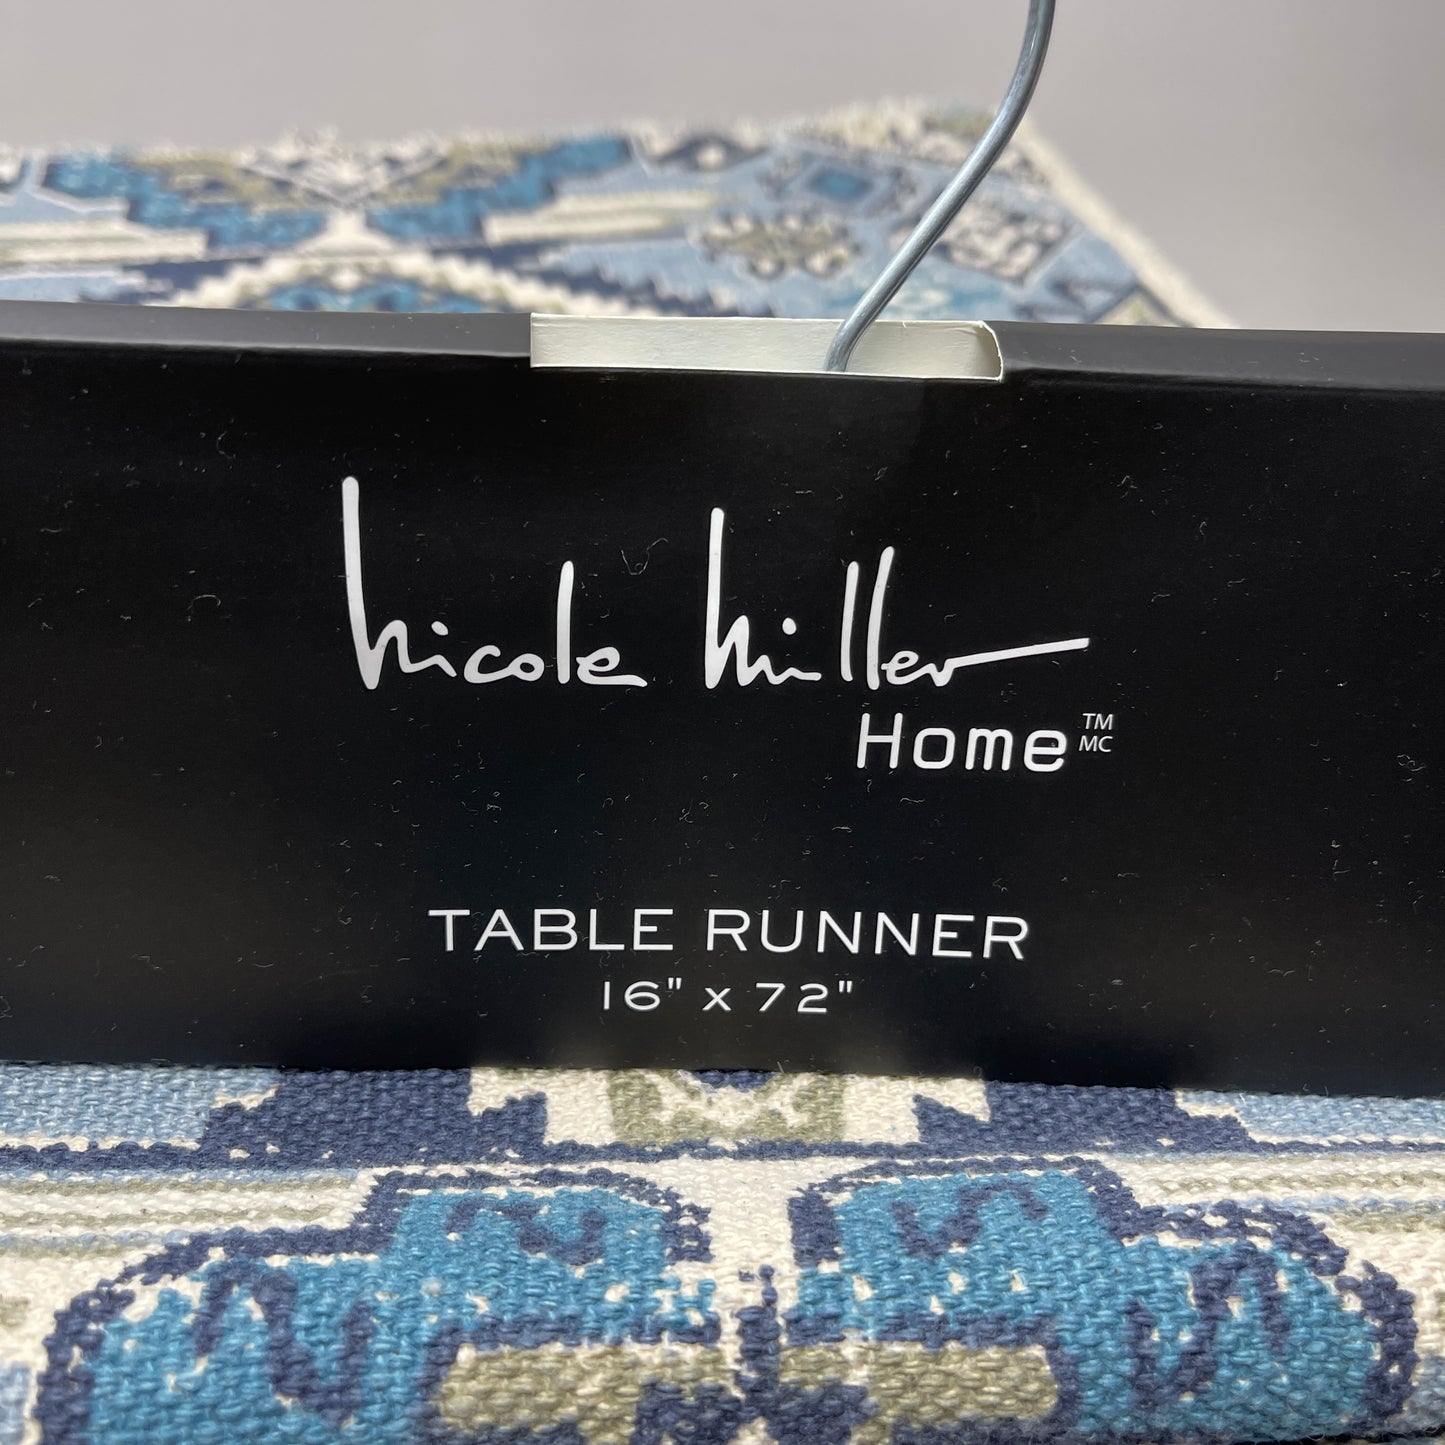 NICOLE MILLER HOME Table Runner 16" x 72" Blue Aztec Pattern 502524 (New)